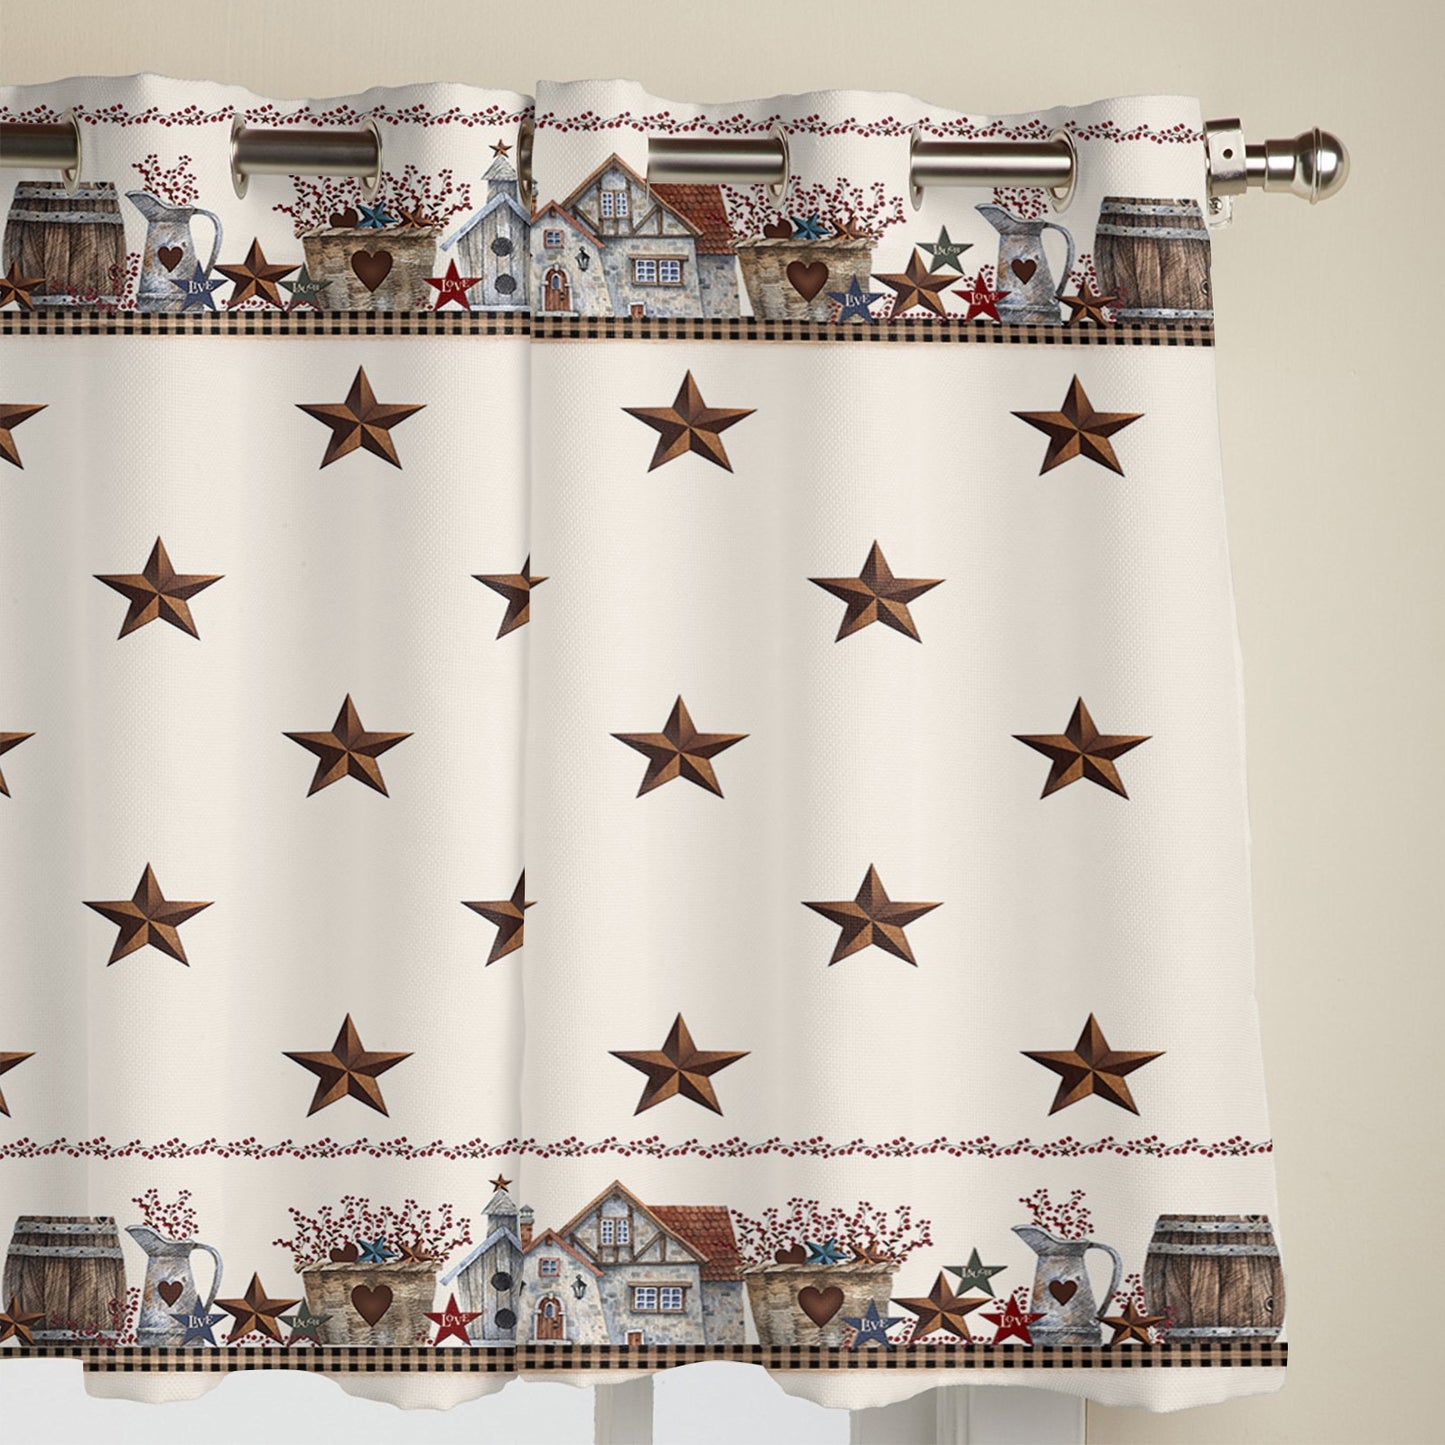 American Country Country Star Farm Window Curtains Kitchen Bedroom Drapes Home Decor Luxury Curtains for Living Room